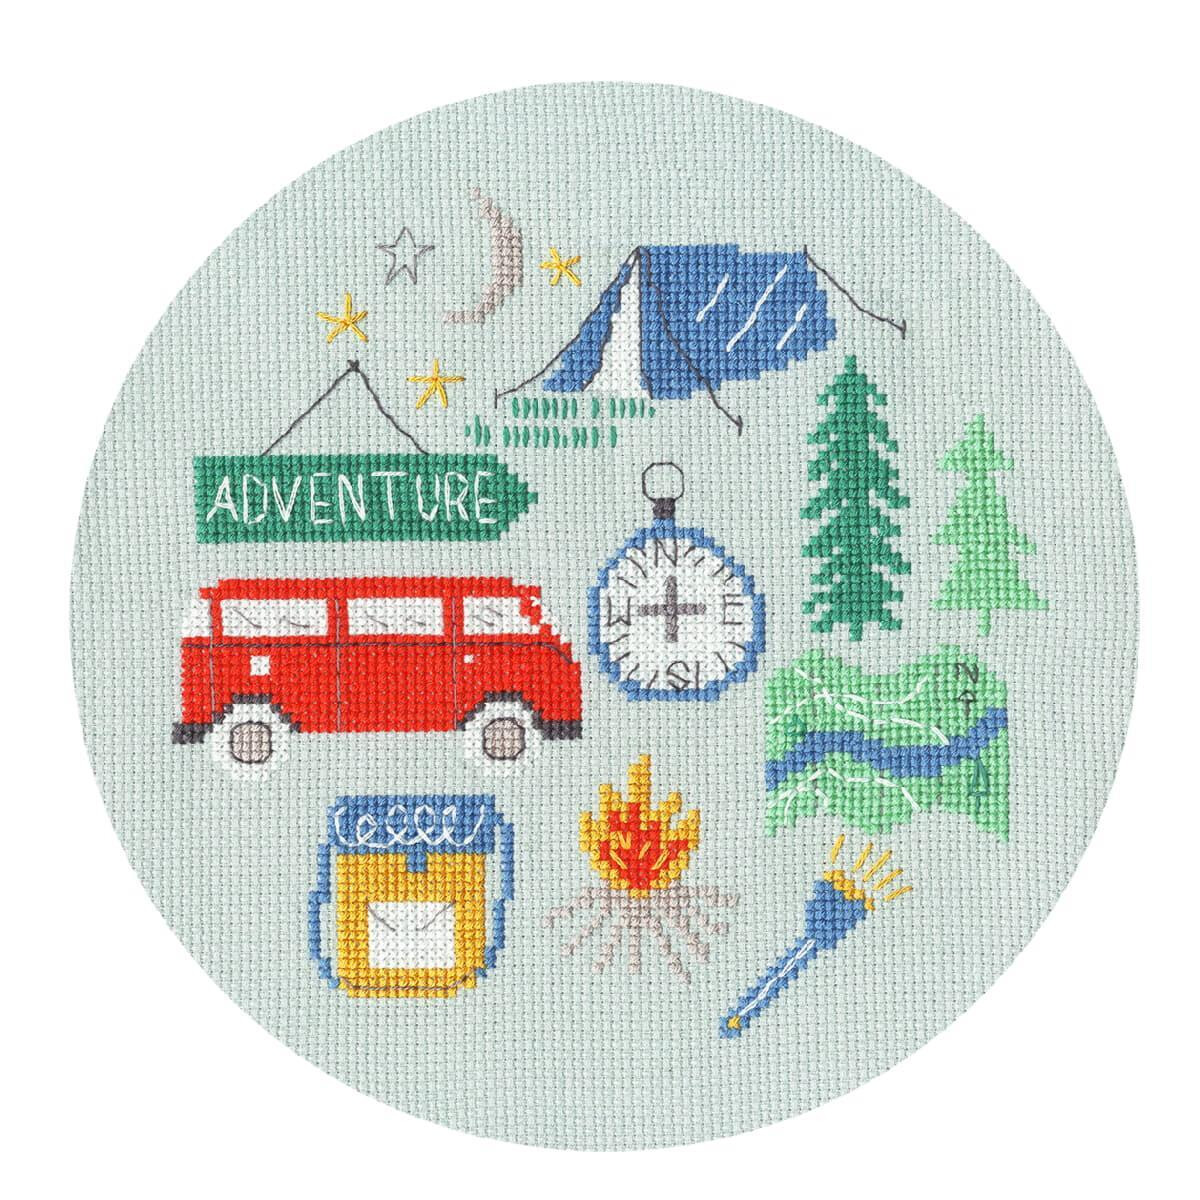 A circular embroidery pack design from Bothy Threads...